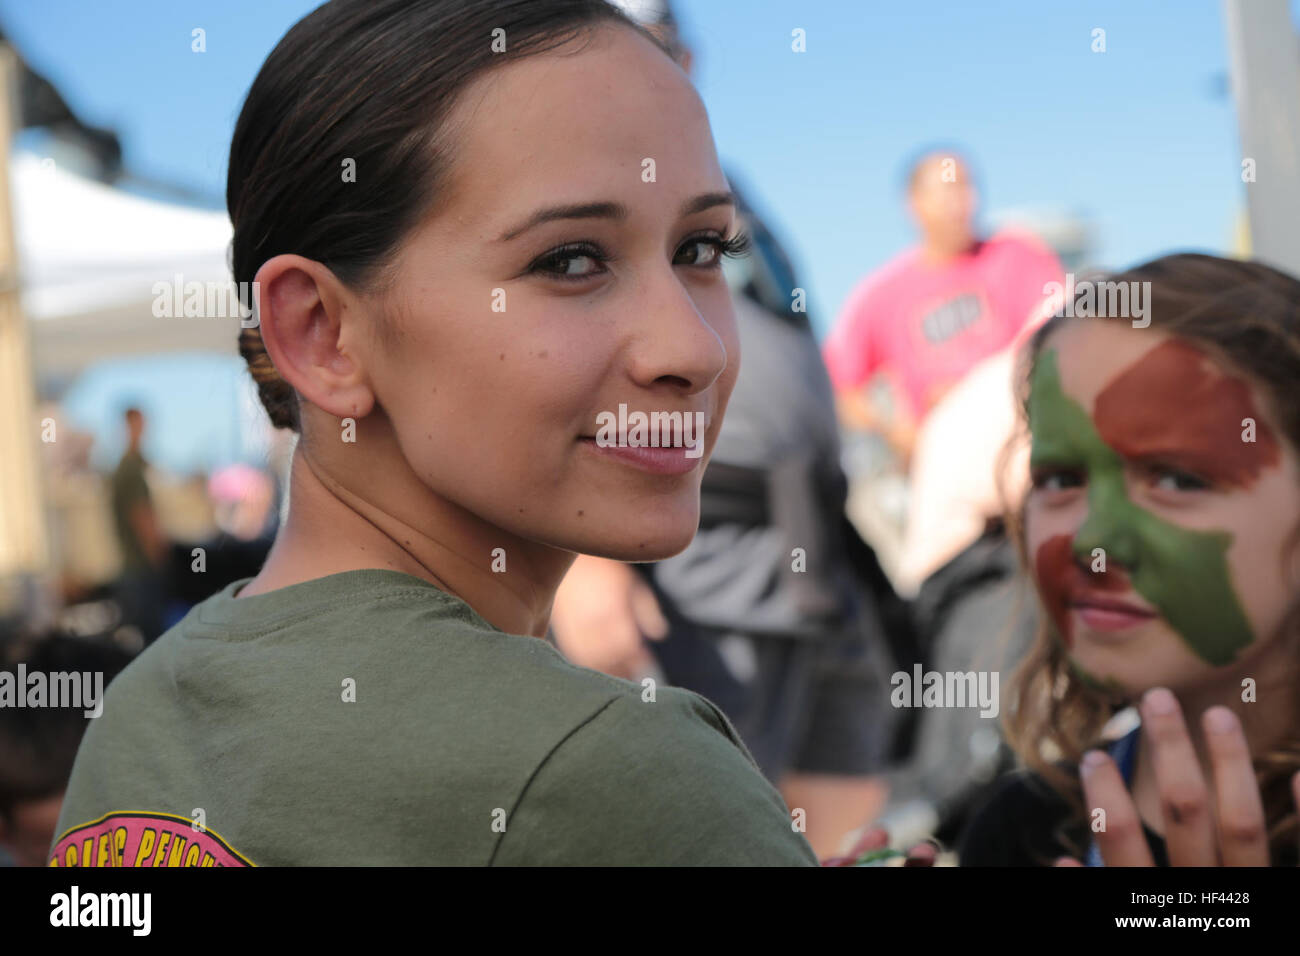 U.S. Marine Lance Cpl. Cameo Prusheik with Marine Air Support Squadron 6, 4th Marine Air Wing, applies camouflage paint on the faces of patrons attending the 2016 Marine Corps Air Station Miramar Air Show at MCAS Miramar, Calif., Sept. 24, 2016. The Air Show marks 100 years of Marine Corps Reserves by showcasing prowess of the armed forces and their appreciation of the civilian community’s support for the troops. (U.S. Marine Corps photo by Pfc. Nadia J. Stark/Not Released) 2016 MCAS Miramar Air Show 160924-M-BV291-089 Stock Photo